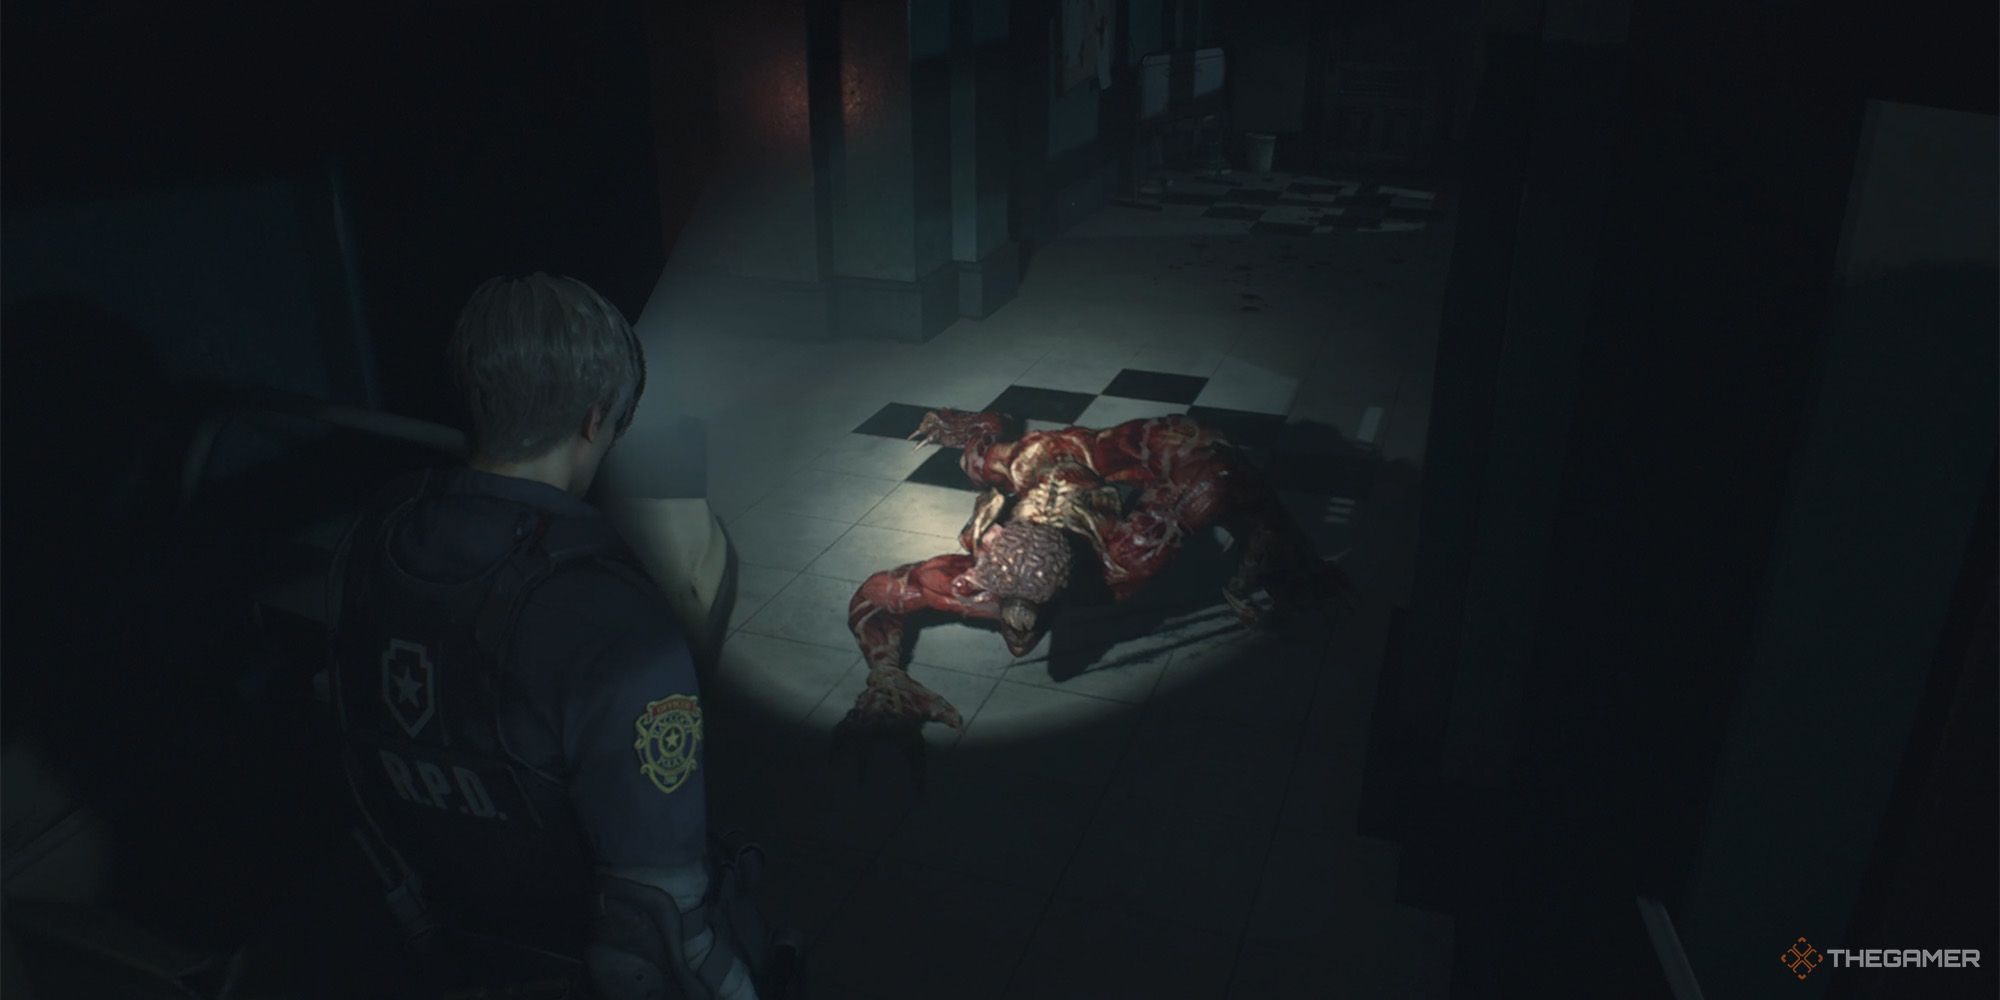 Leon looking at a Licker in Resident Evil 2 Remake